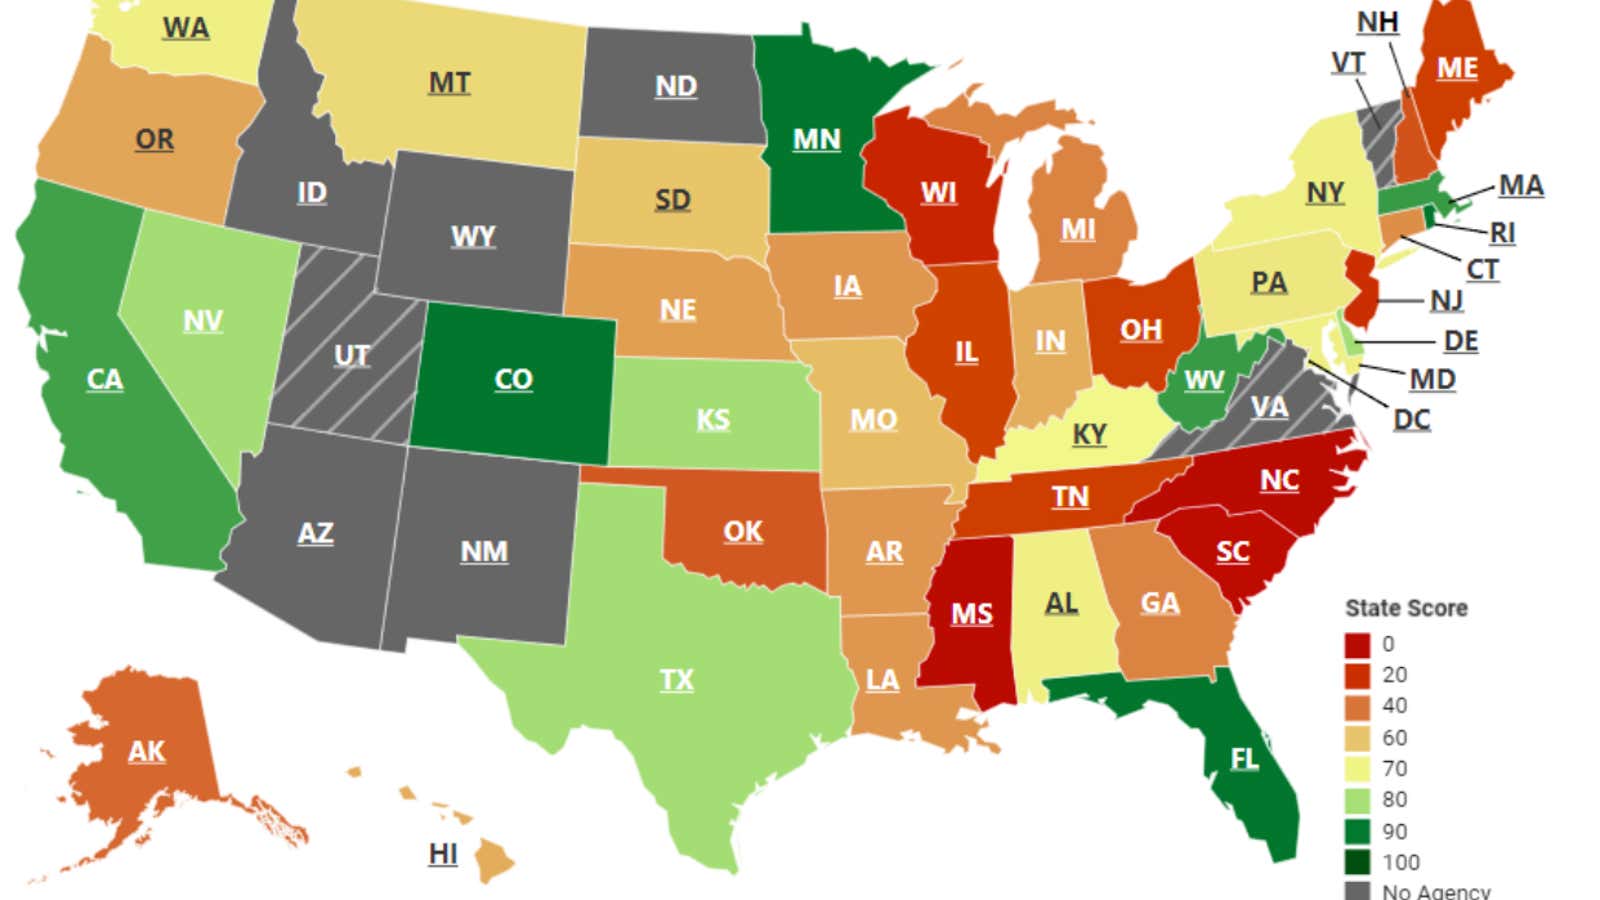 US states ranked by ethics agencies’ transparency.